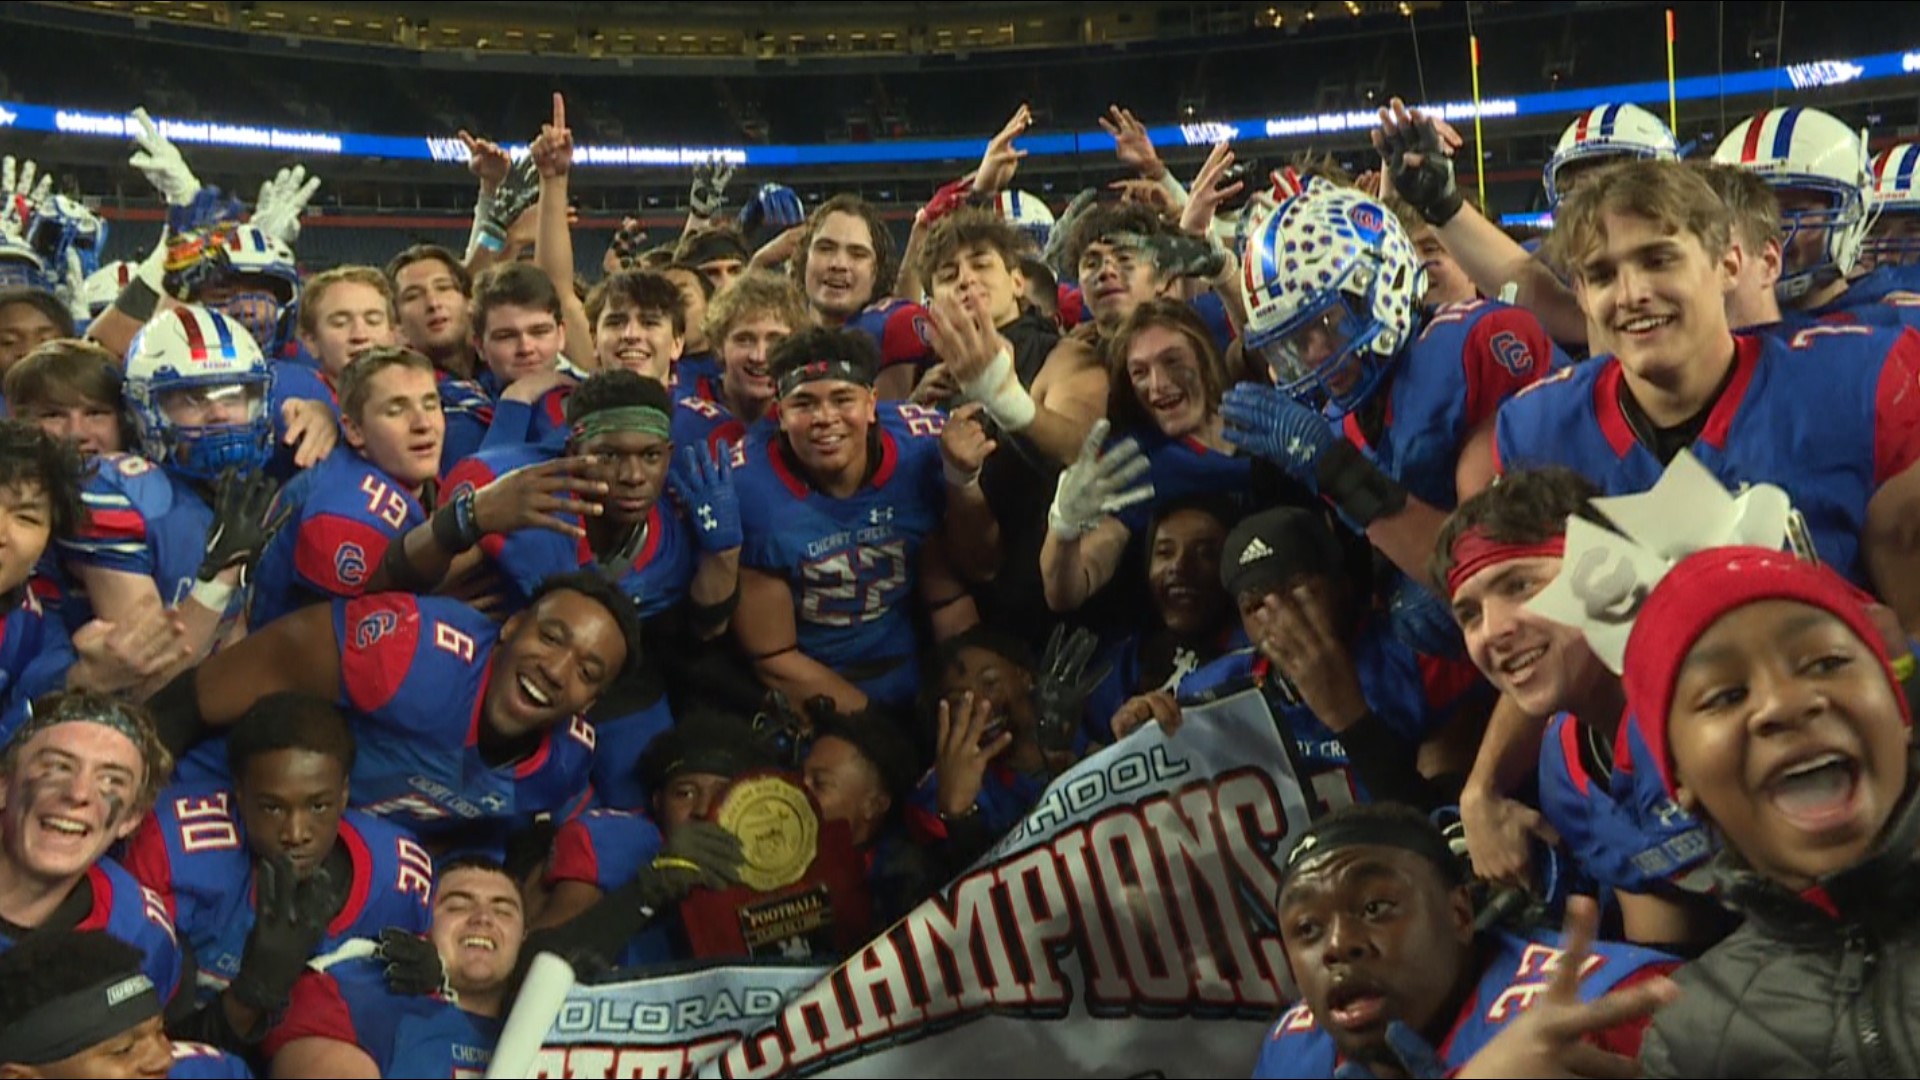 The Bruins defeated Valor Christian 24-17 to claim the Class 5A football title for the fourth year in a row.